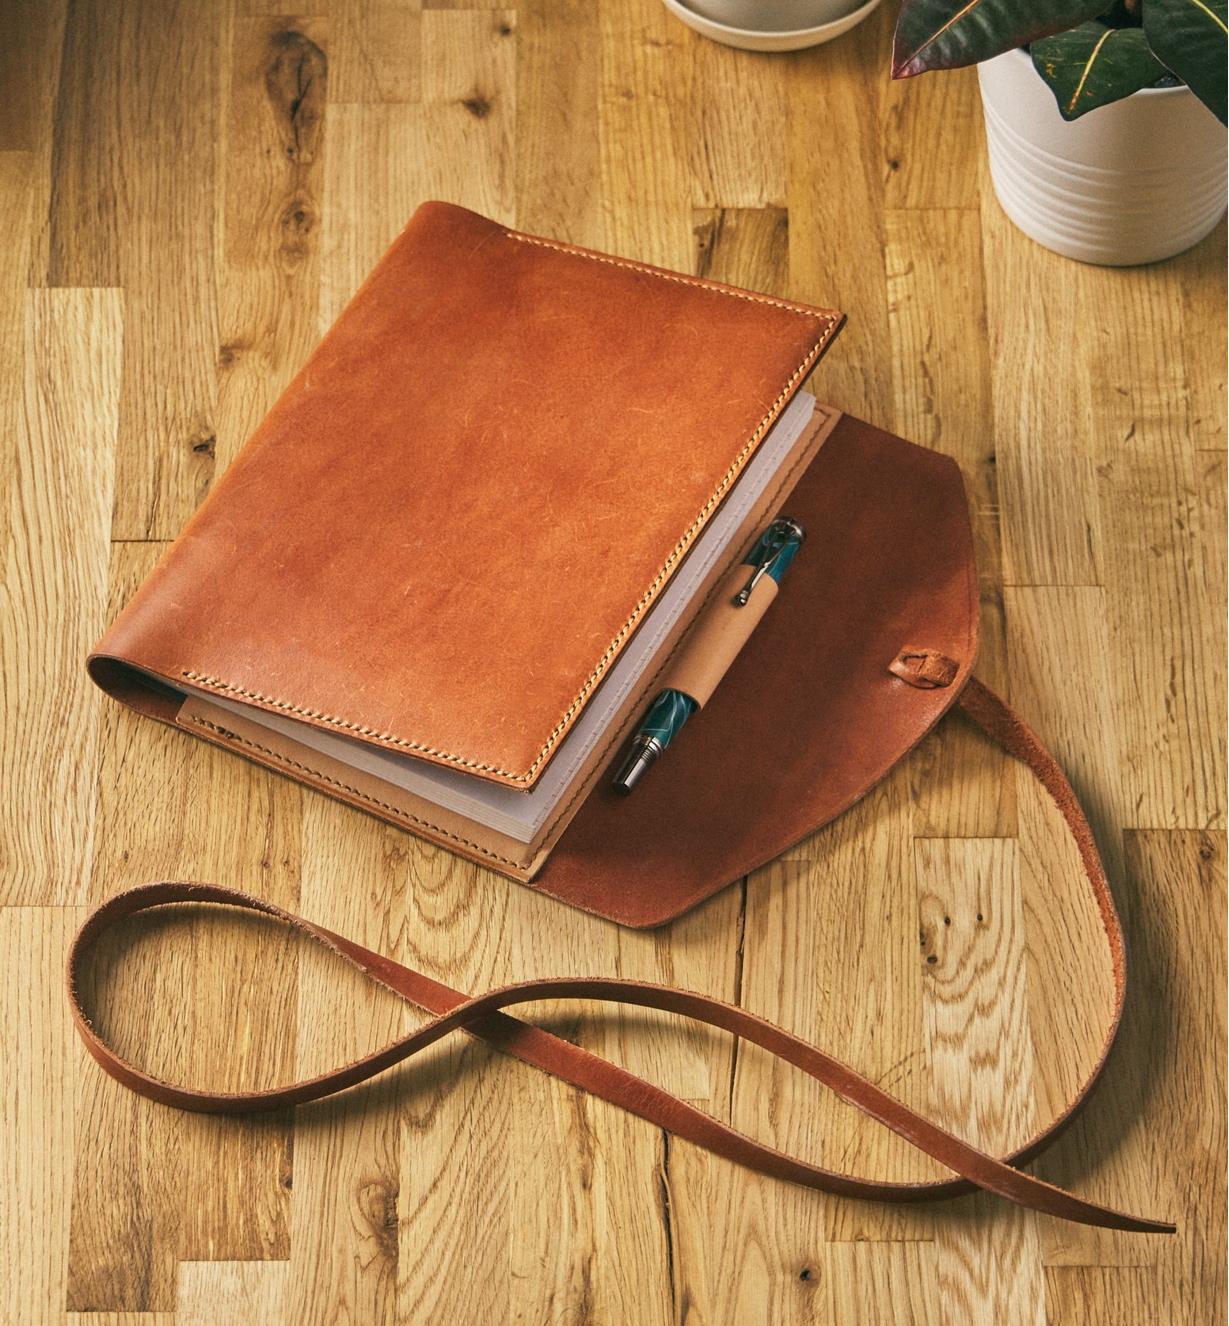 An example of the completed leather journal cover